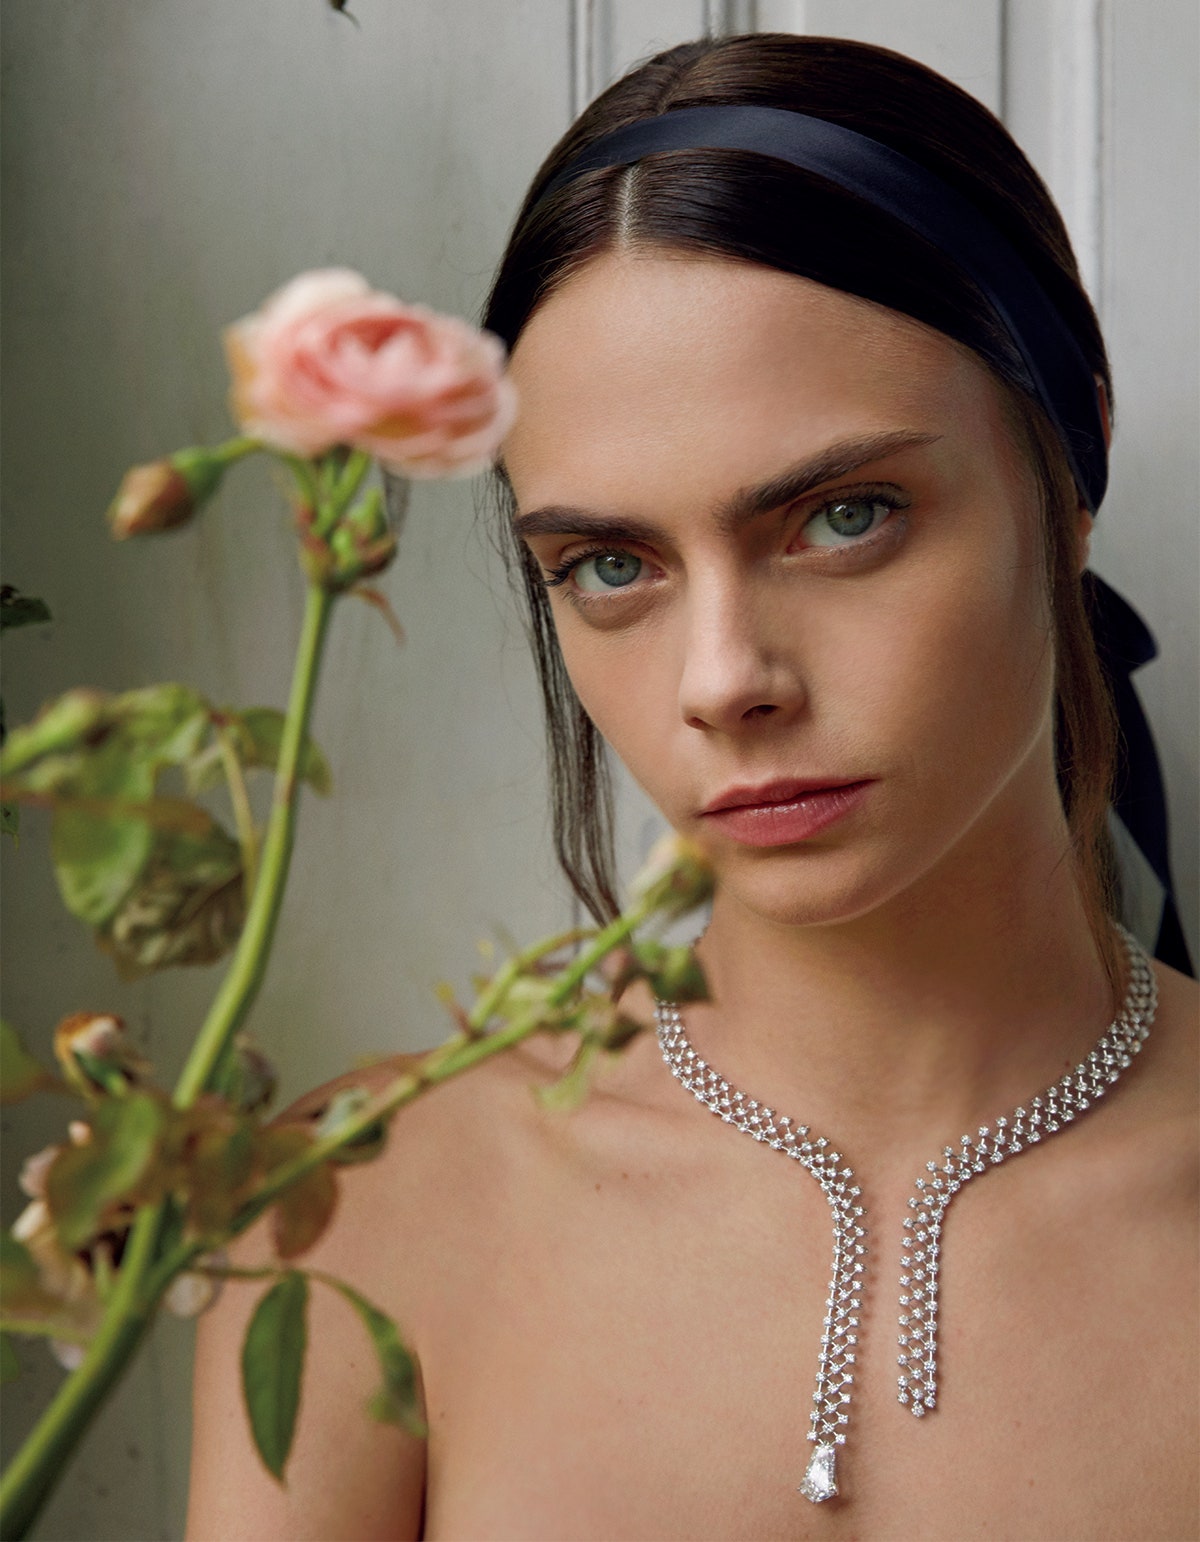 Cara Delevingne shines in Christian Dior Haute Couture on Vogue Japan November 2021 cover